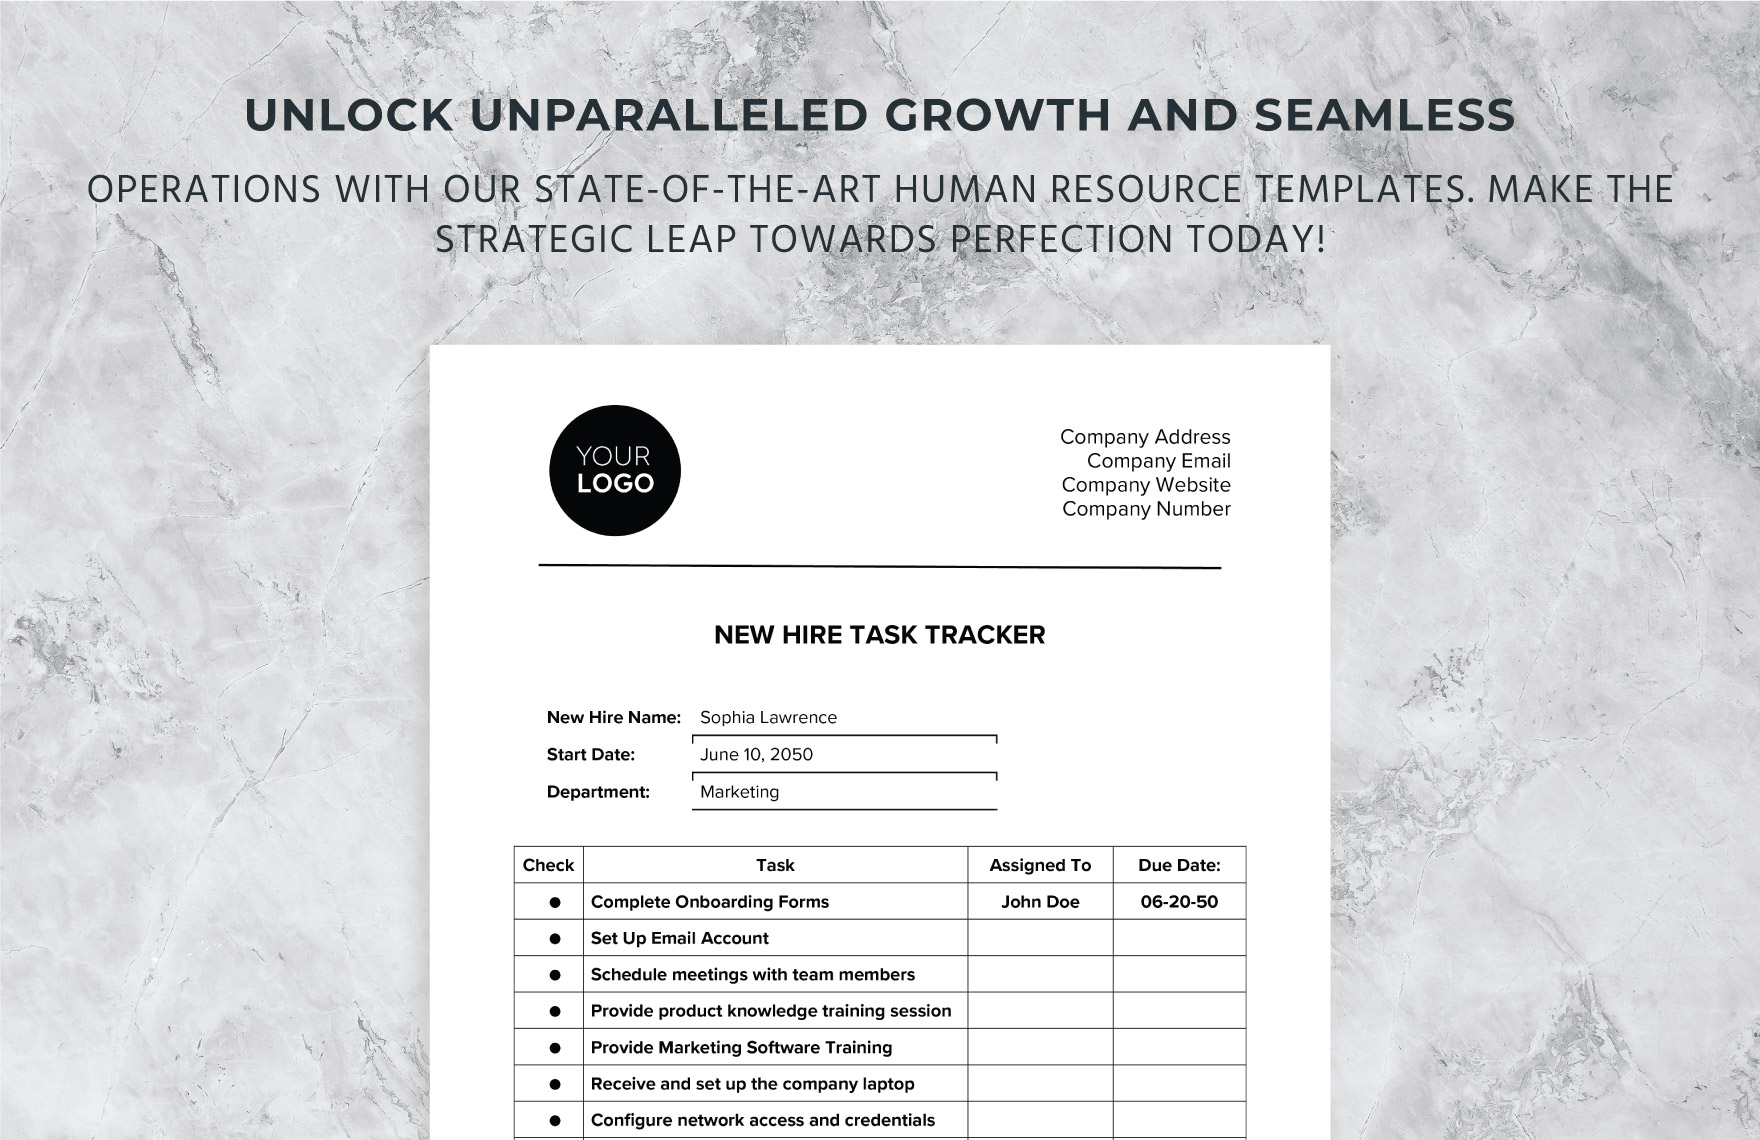 New Hire Task Tracker HR Template